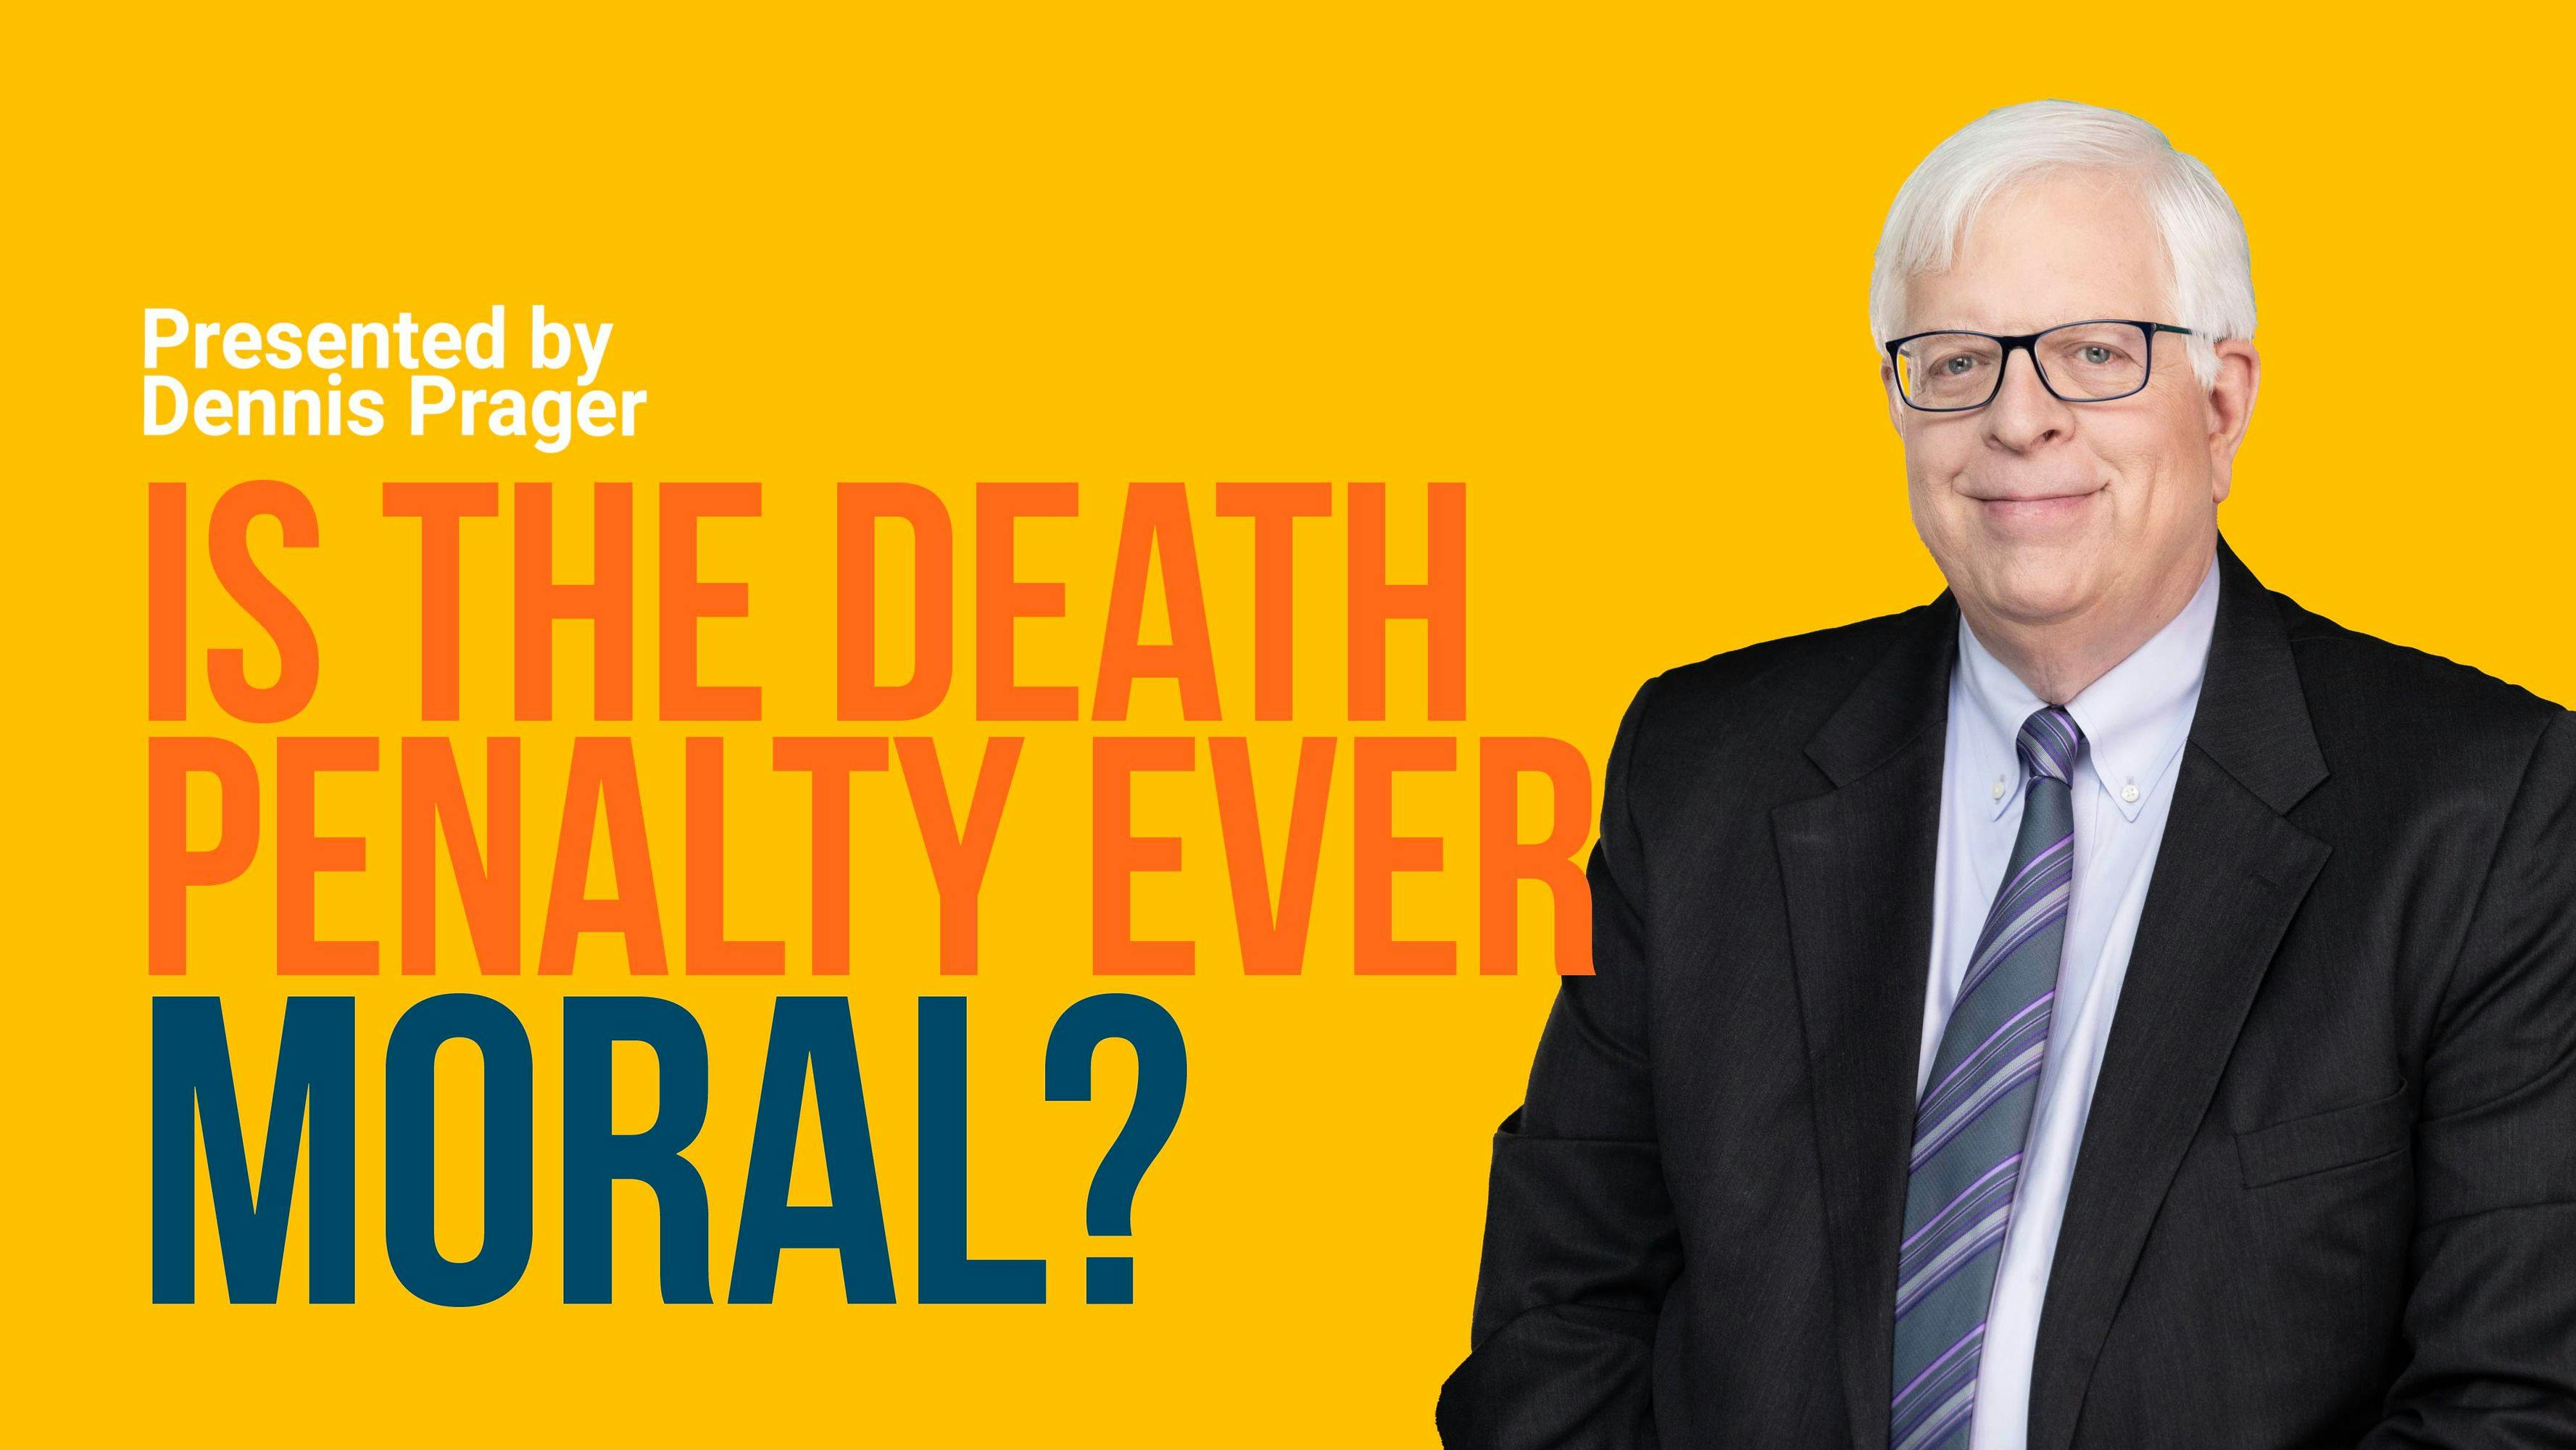 Is the Death Penalty Ever Moral?